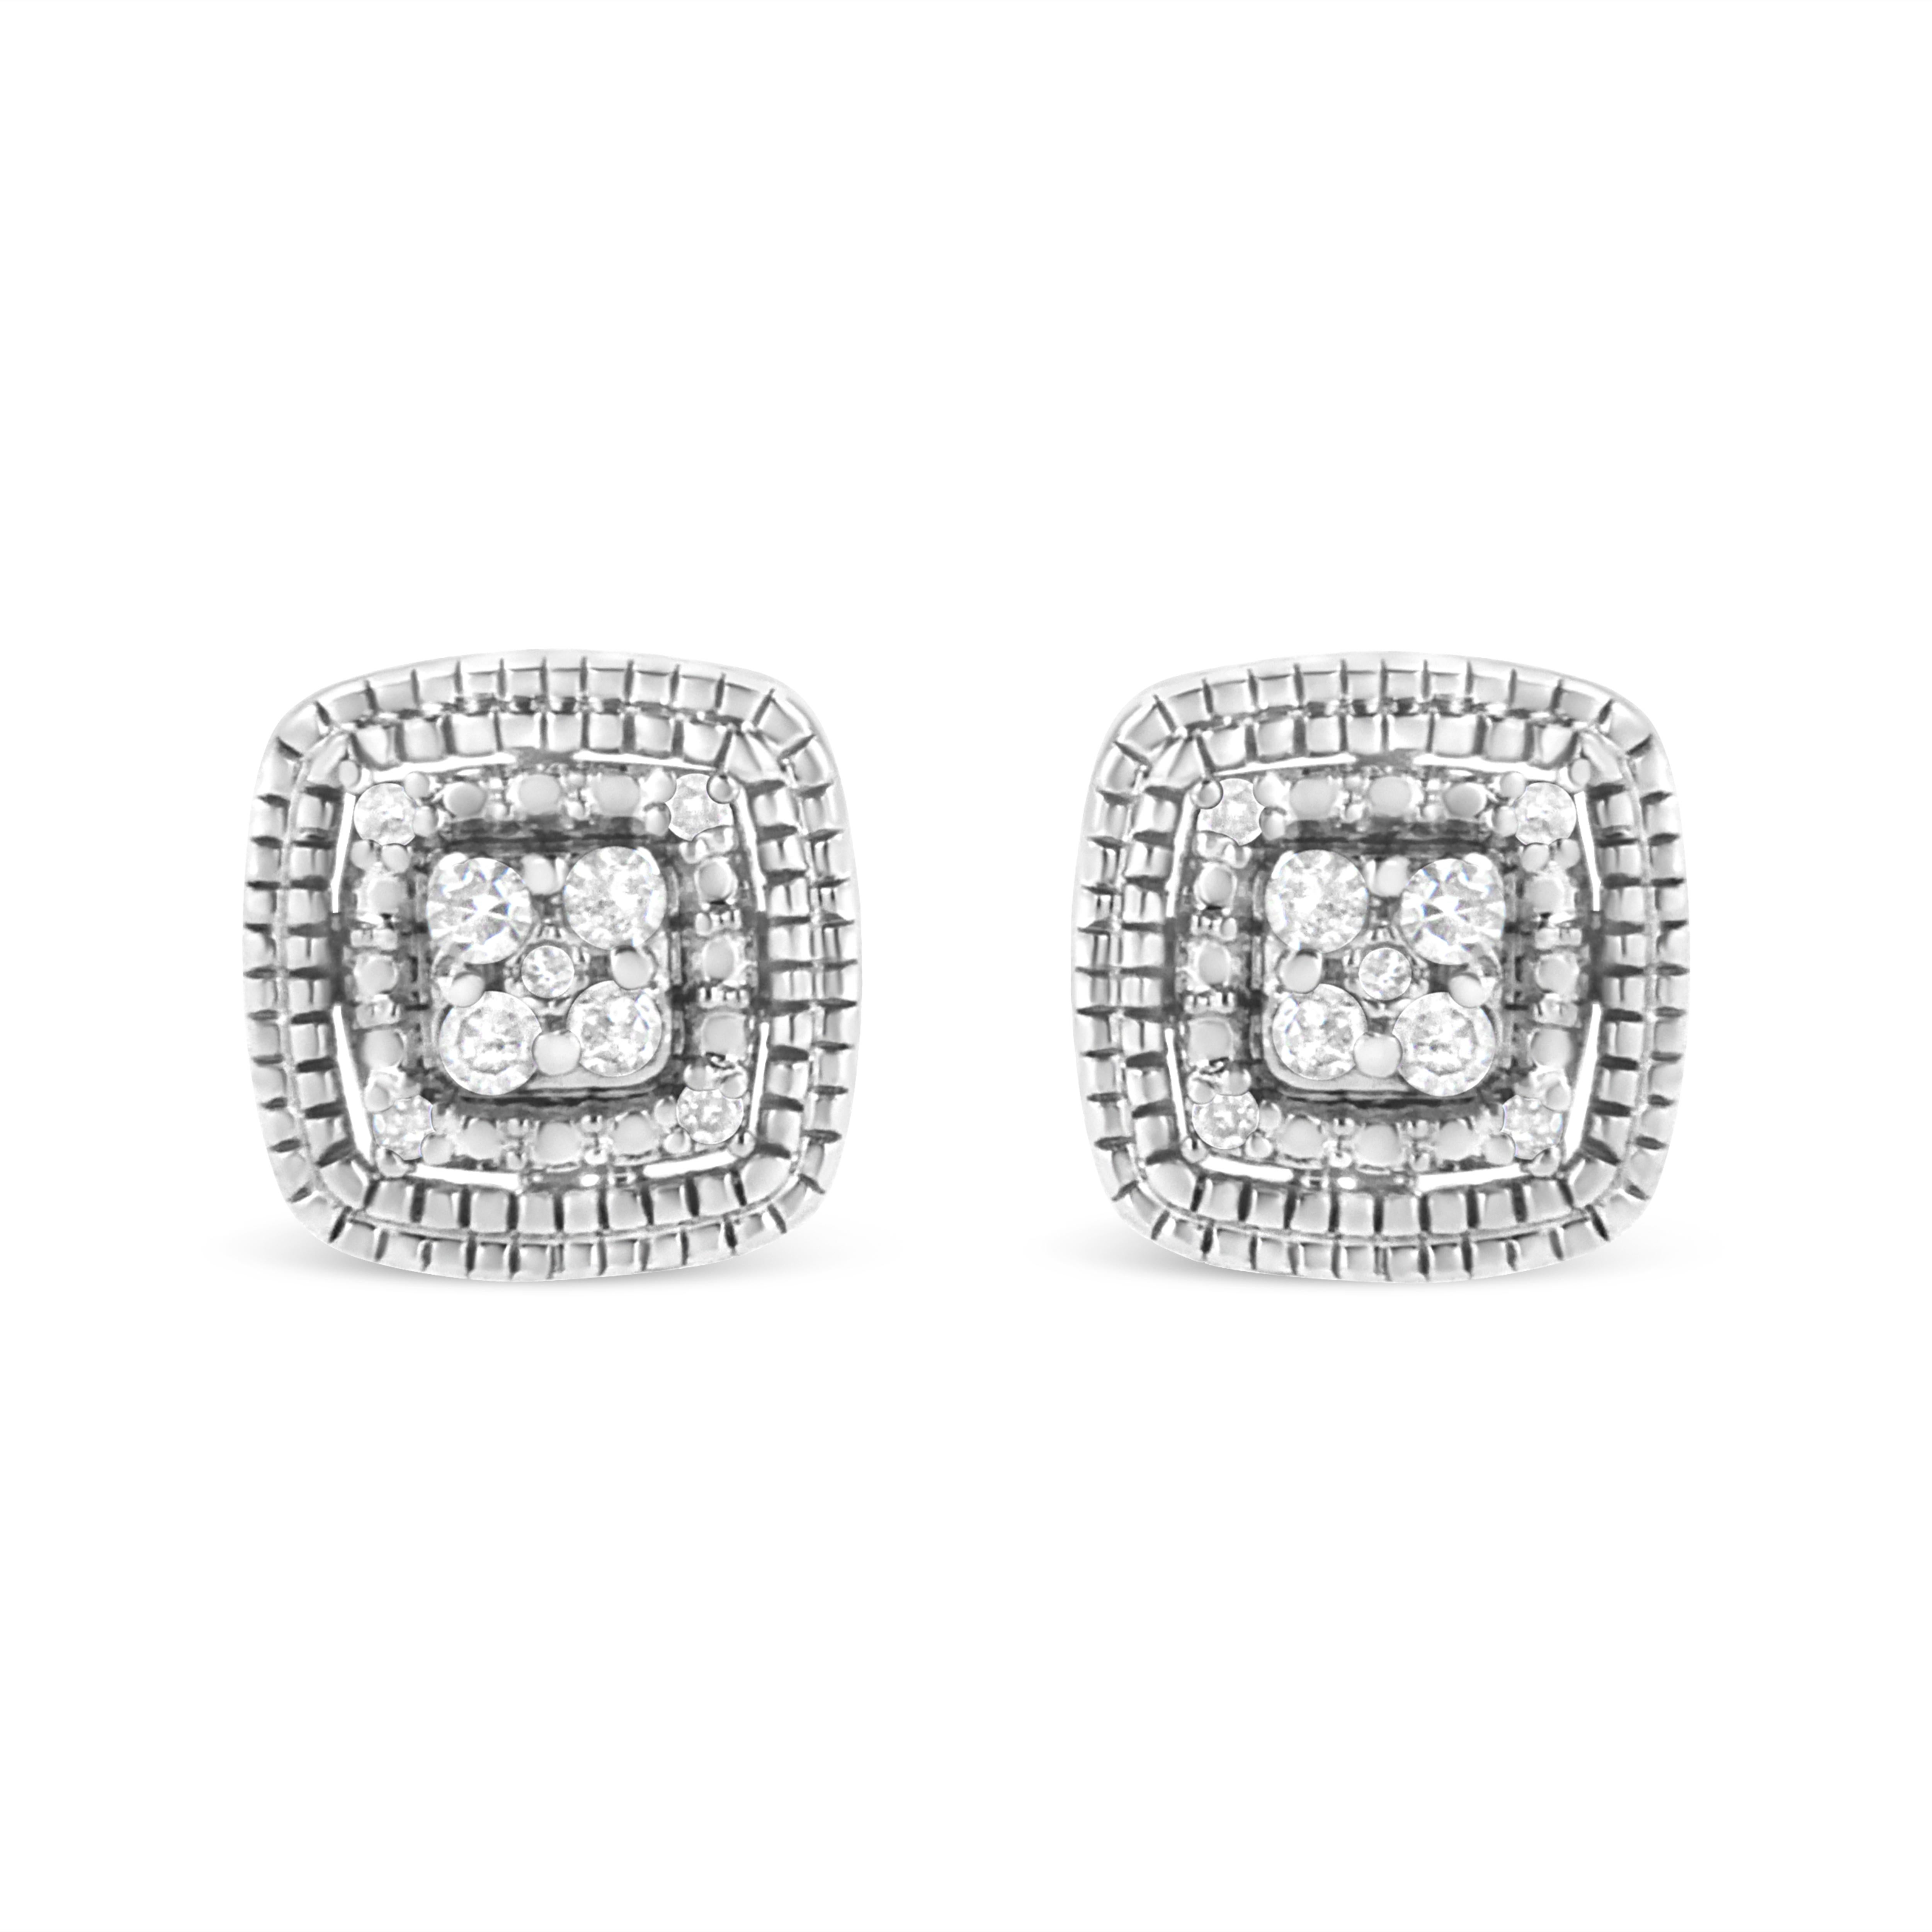 These lovely squared shaped studs are crafted in cool sterling silver and showcase 1/10ct TDW of diamonds. Each earring holds as its centerpiece a 5 diamond composite that is framed by three polished silver beaded ribbons that catch and reflect the